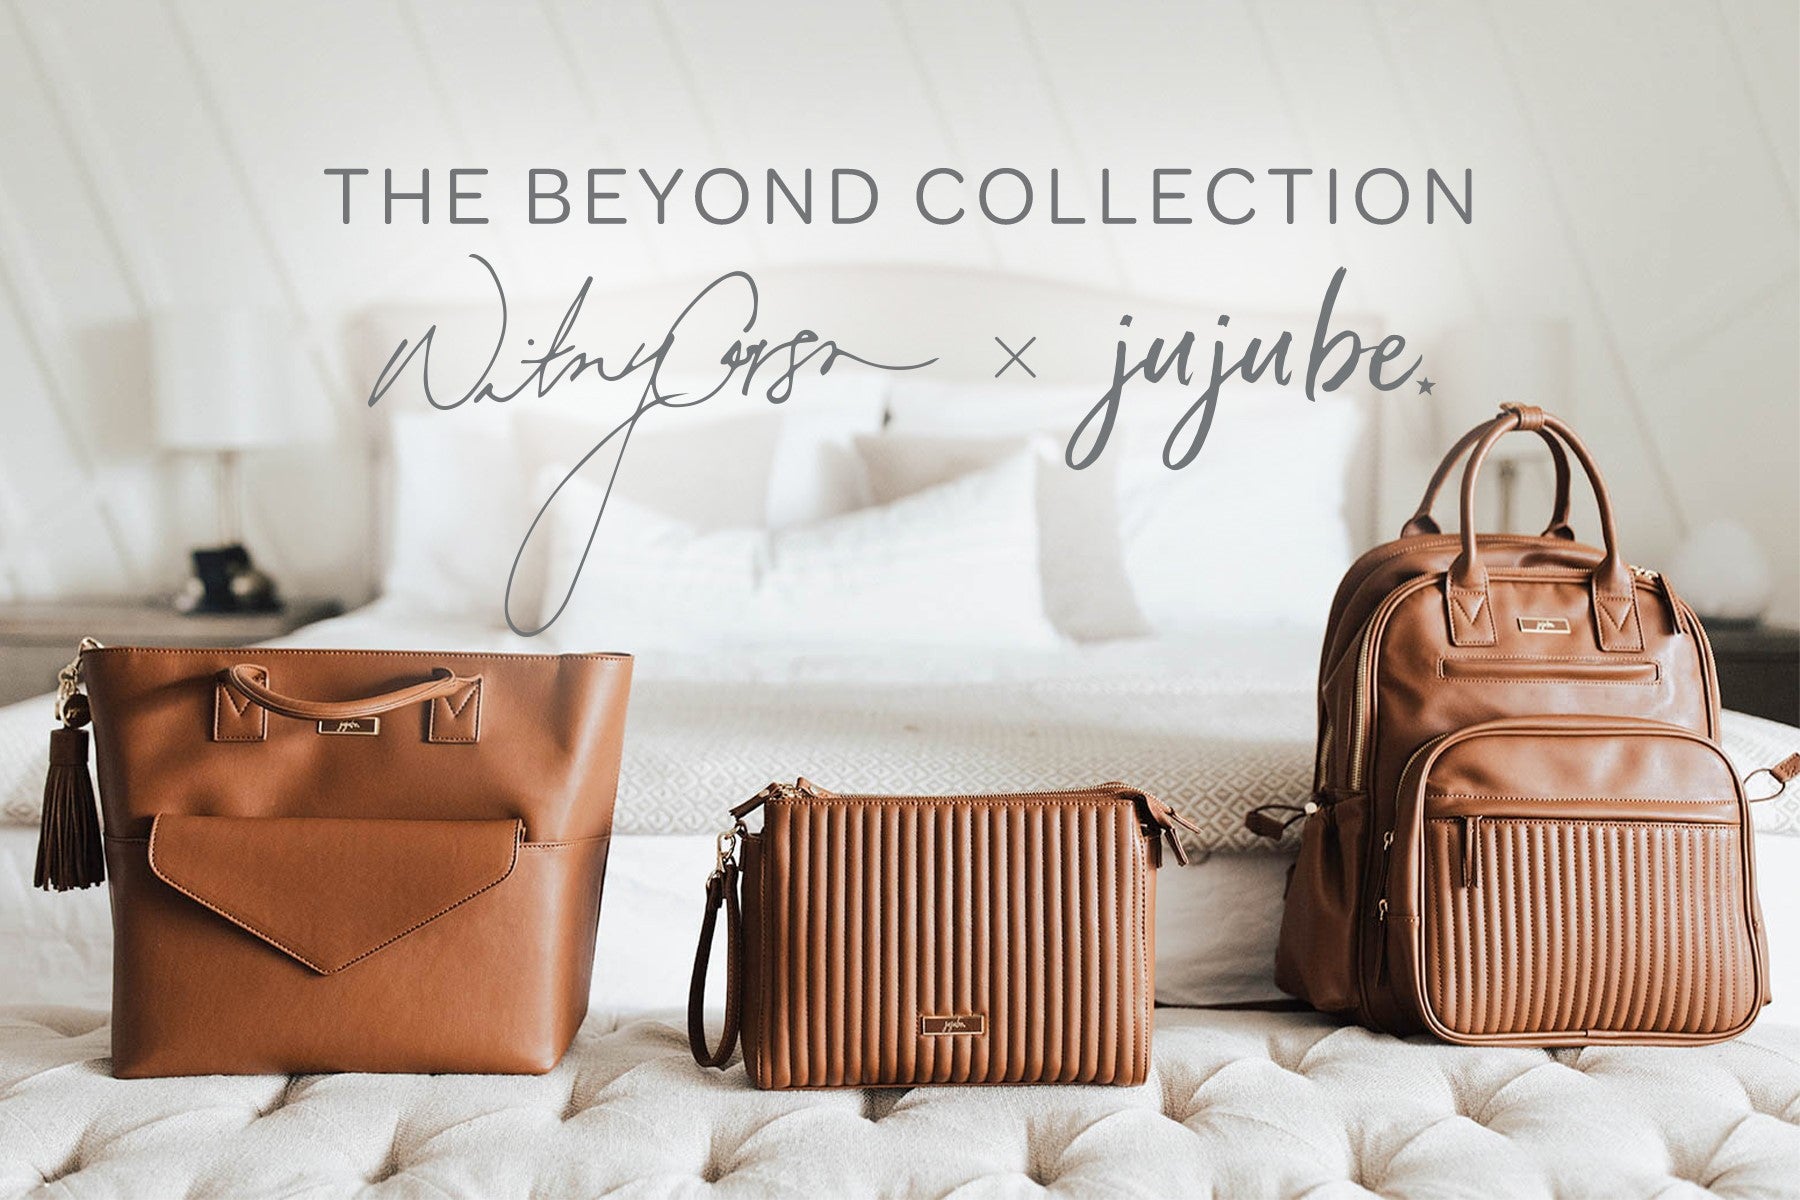 The Beyond Collection Spice, Black & Vanilla Retailers!!